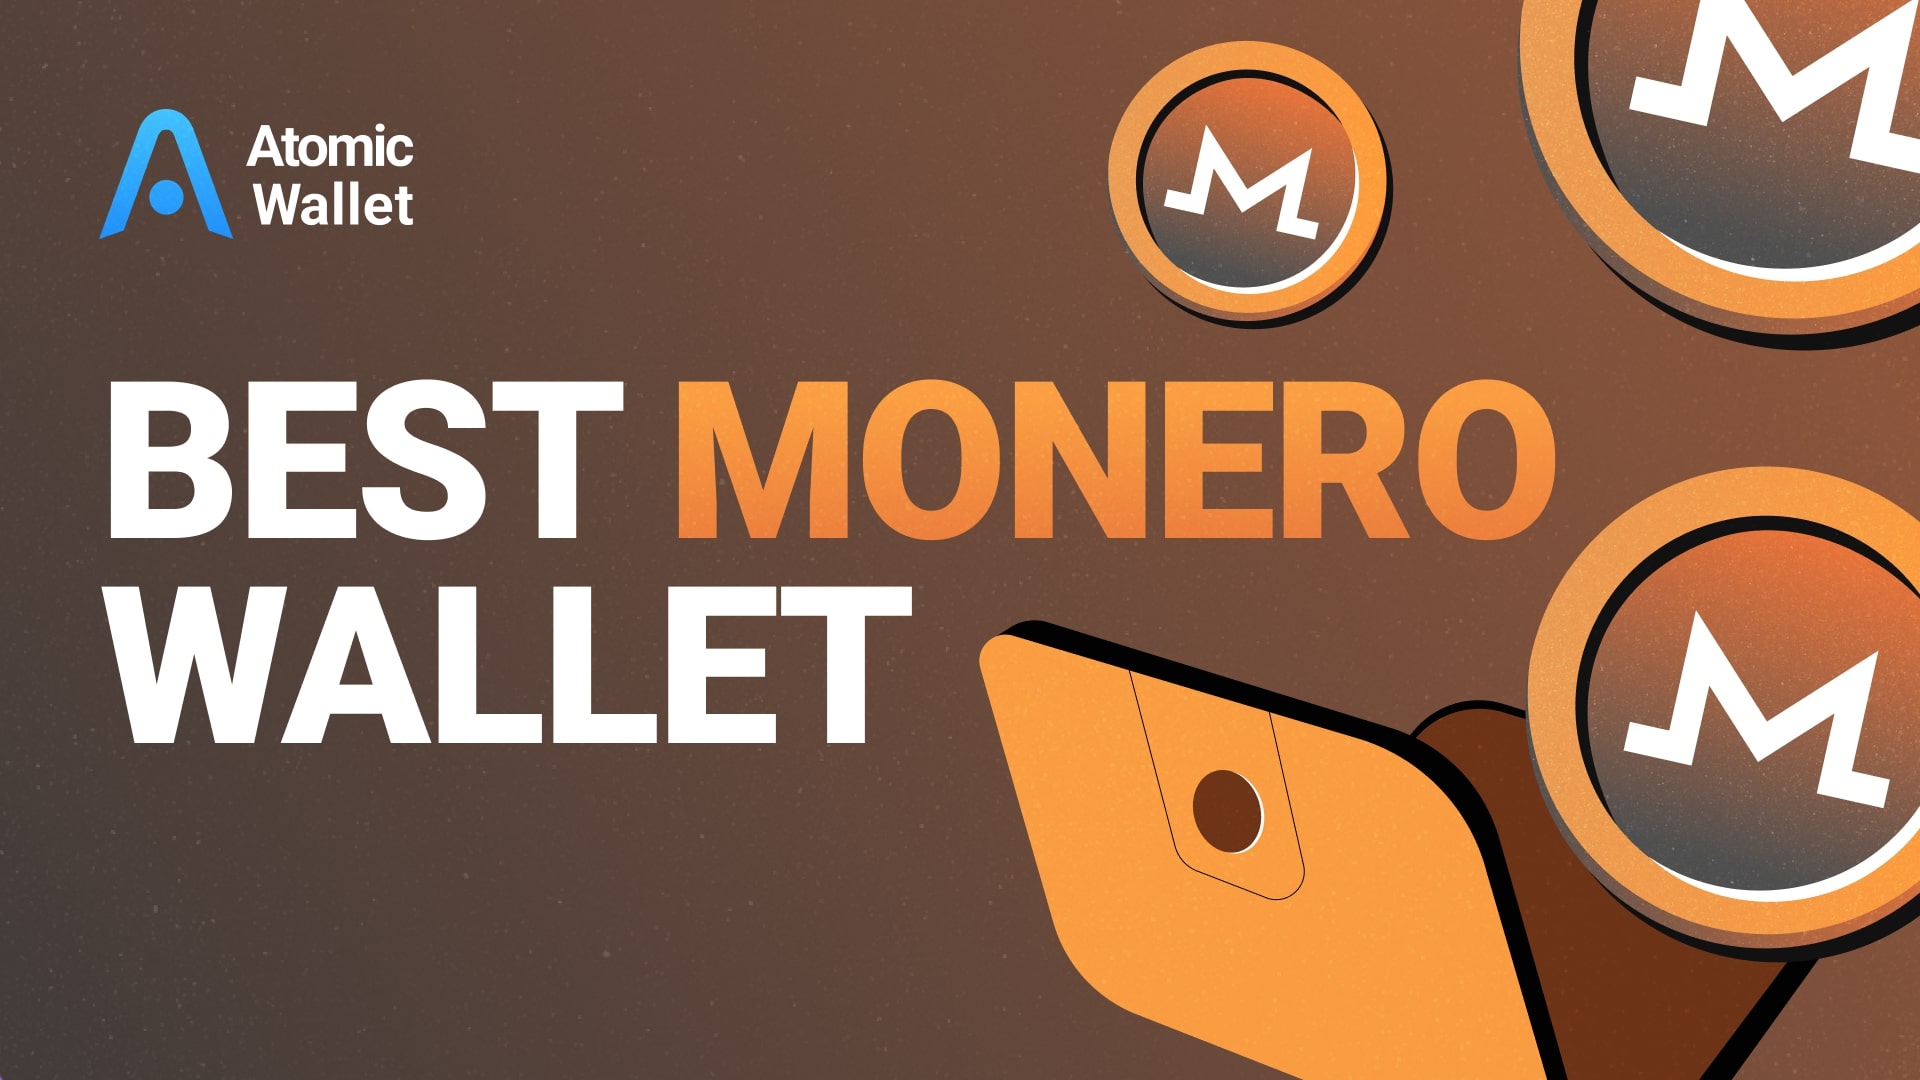 How to Safely Hold Monero in Cold Storage